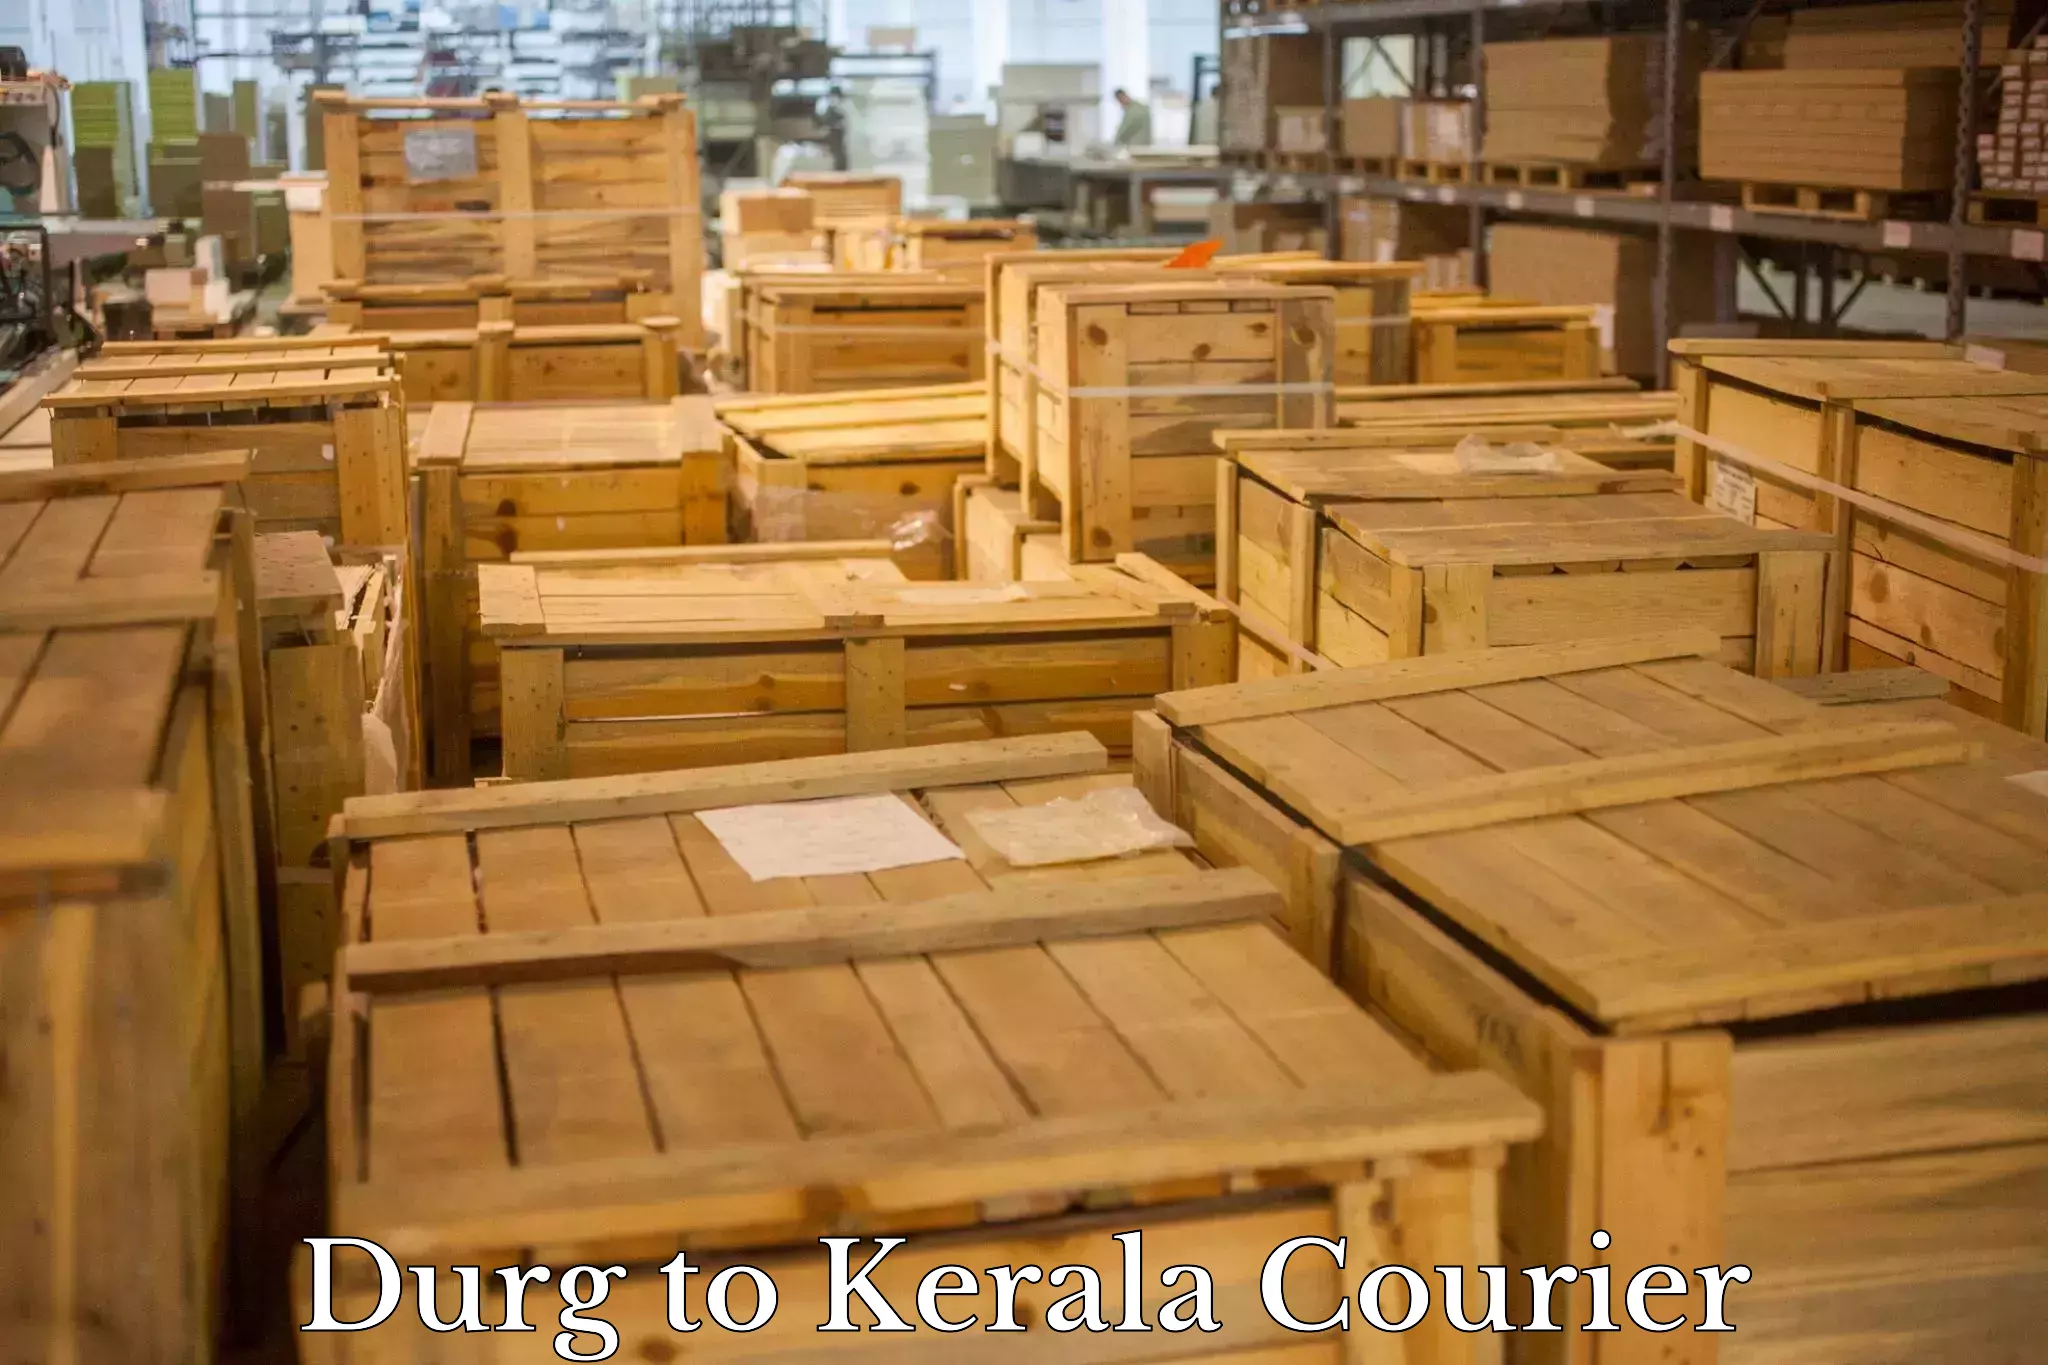 State-of-the-art courier technology Durg to Thrissur